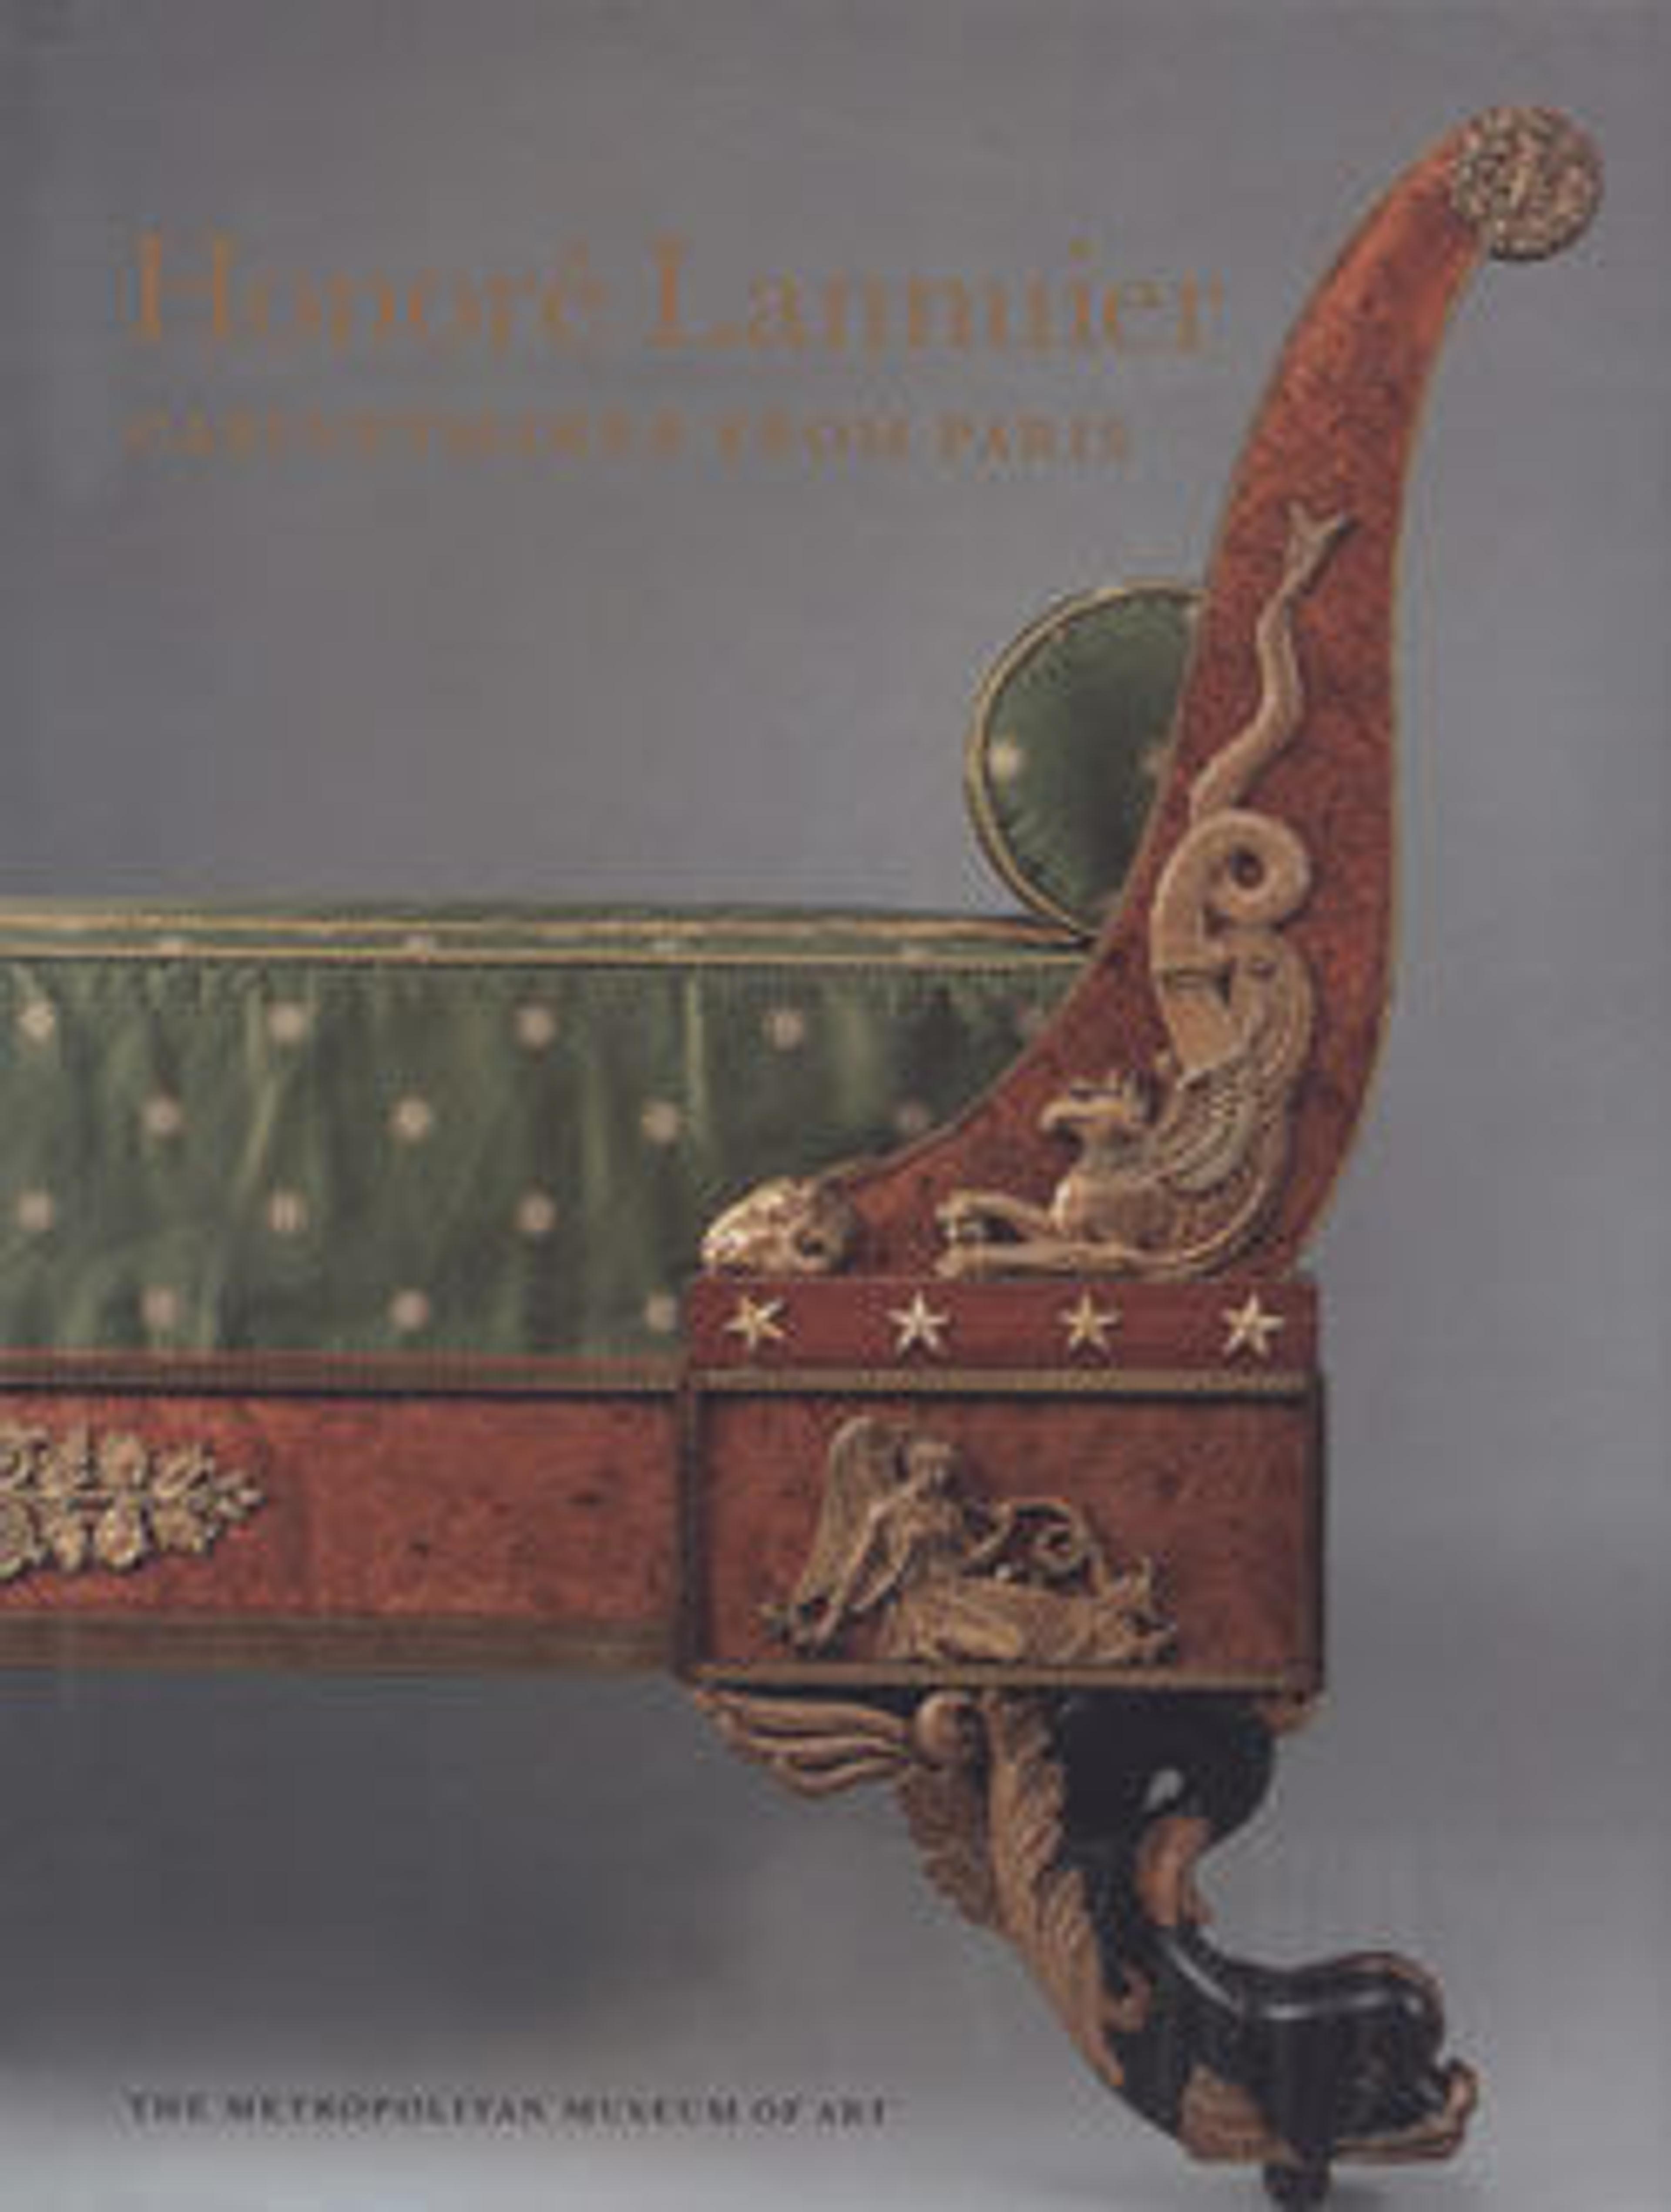 Honore Lannuier, Cabinetmaker from Paris: The Life and Work of a French Ebeniste in Federal New York